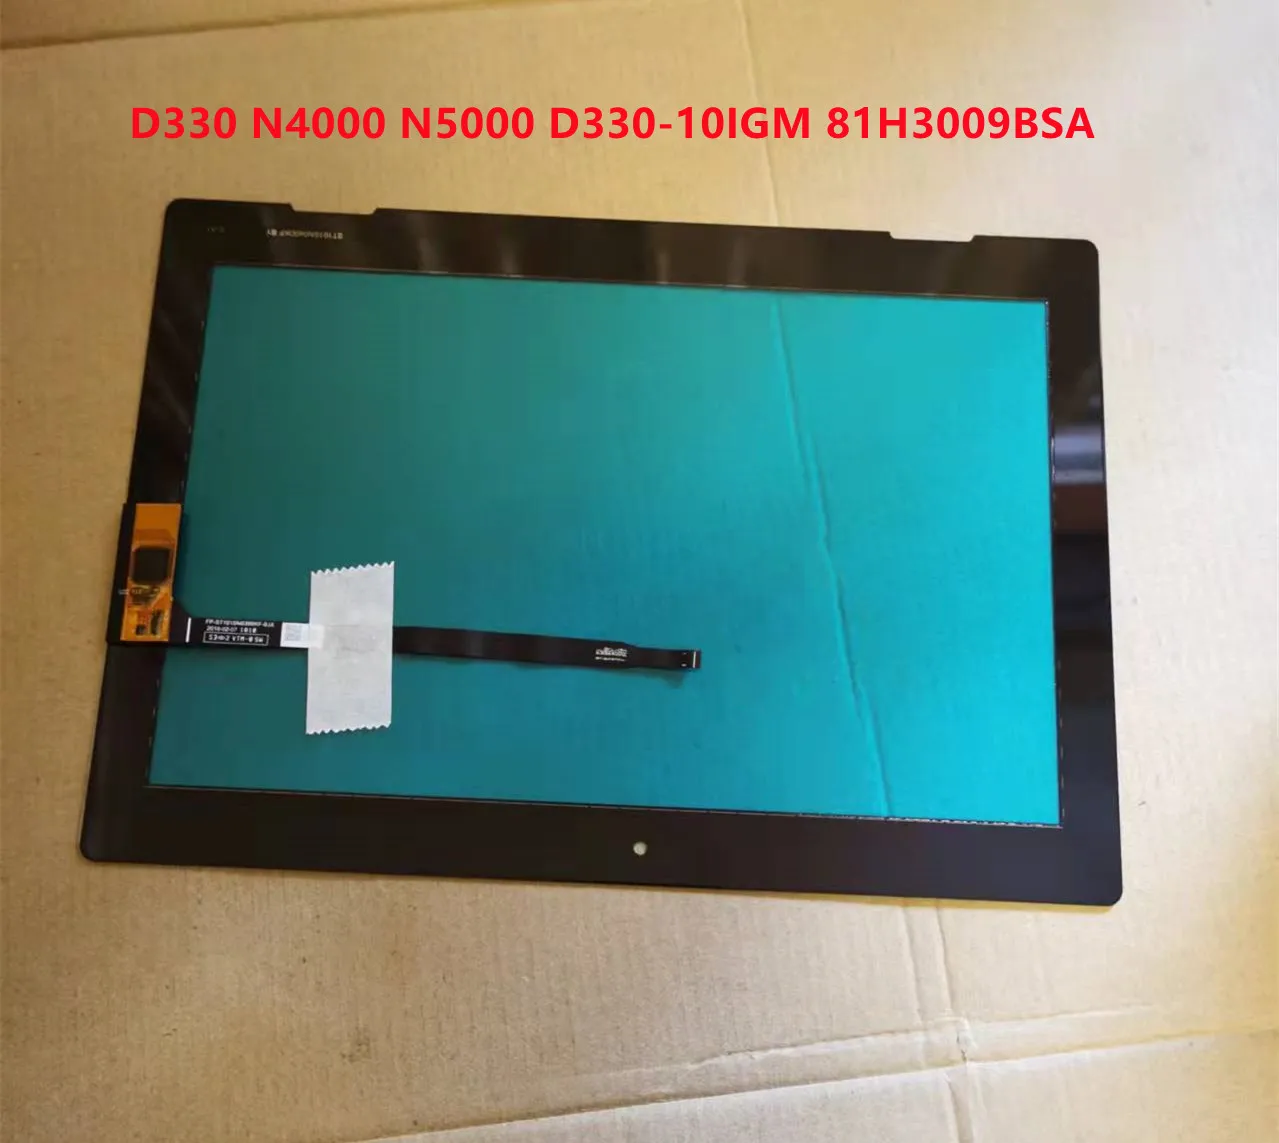 New 10.1" For lenovo IdeaPad D330 N4000 N5000 D330-10IGM 81H3009BSA Touch Screen Glass Panel Replacement